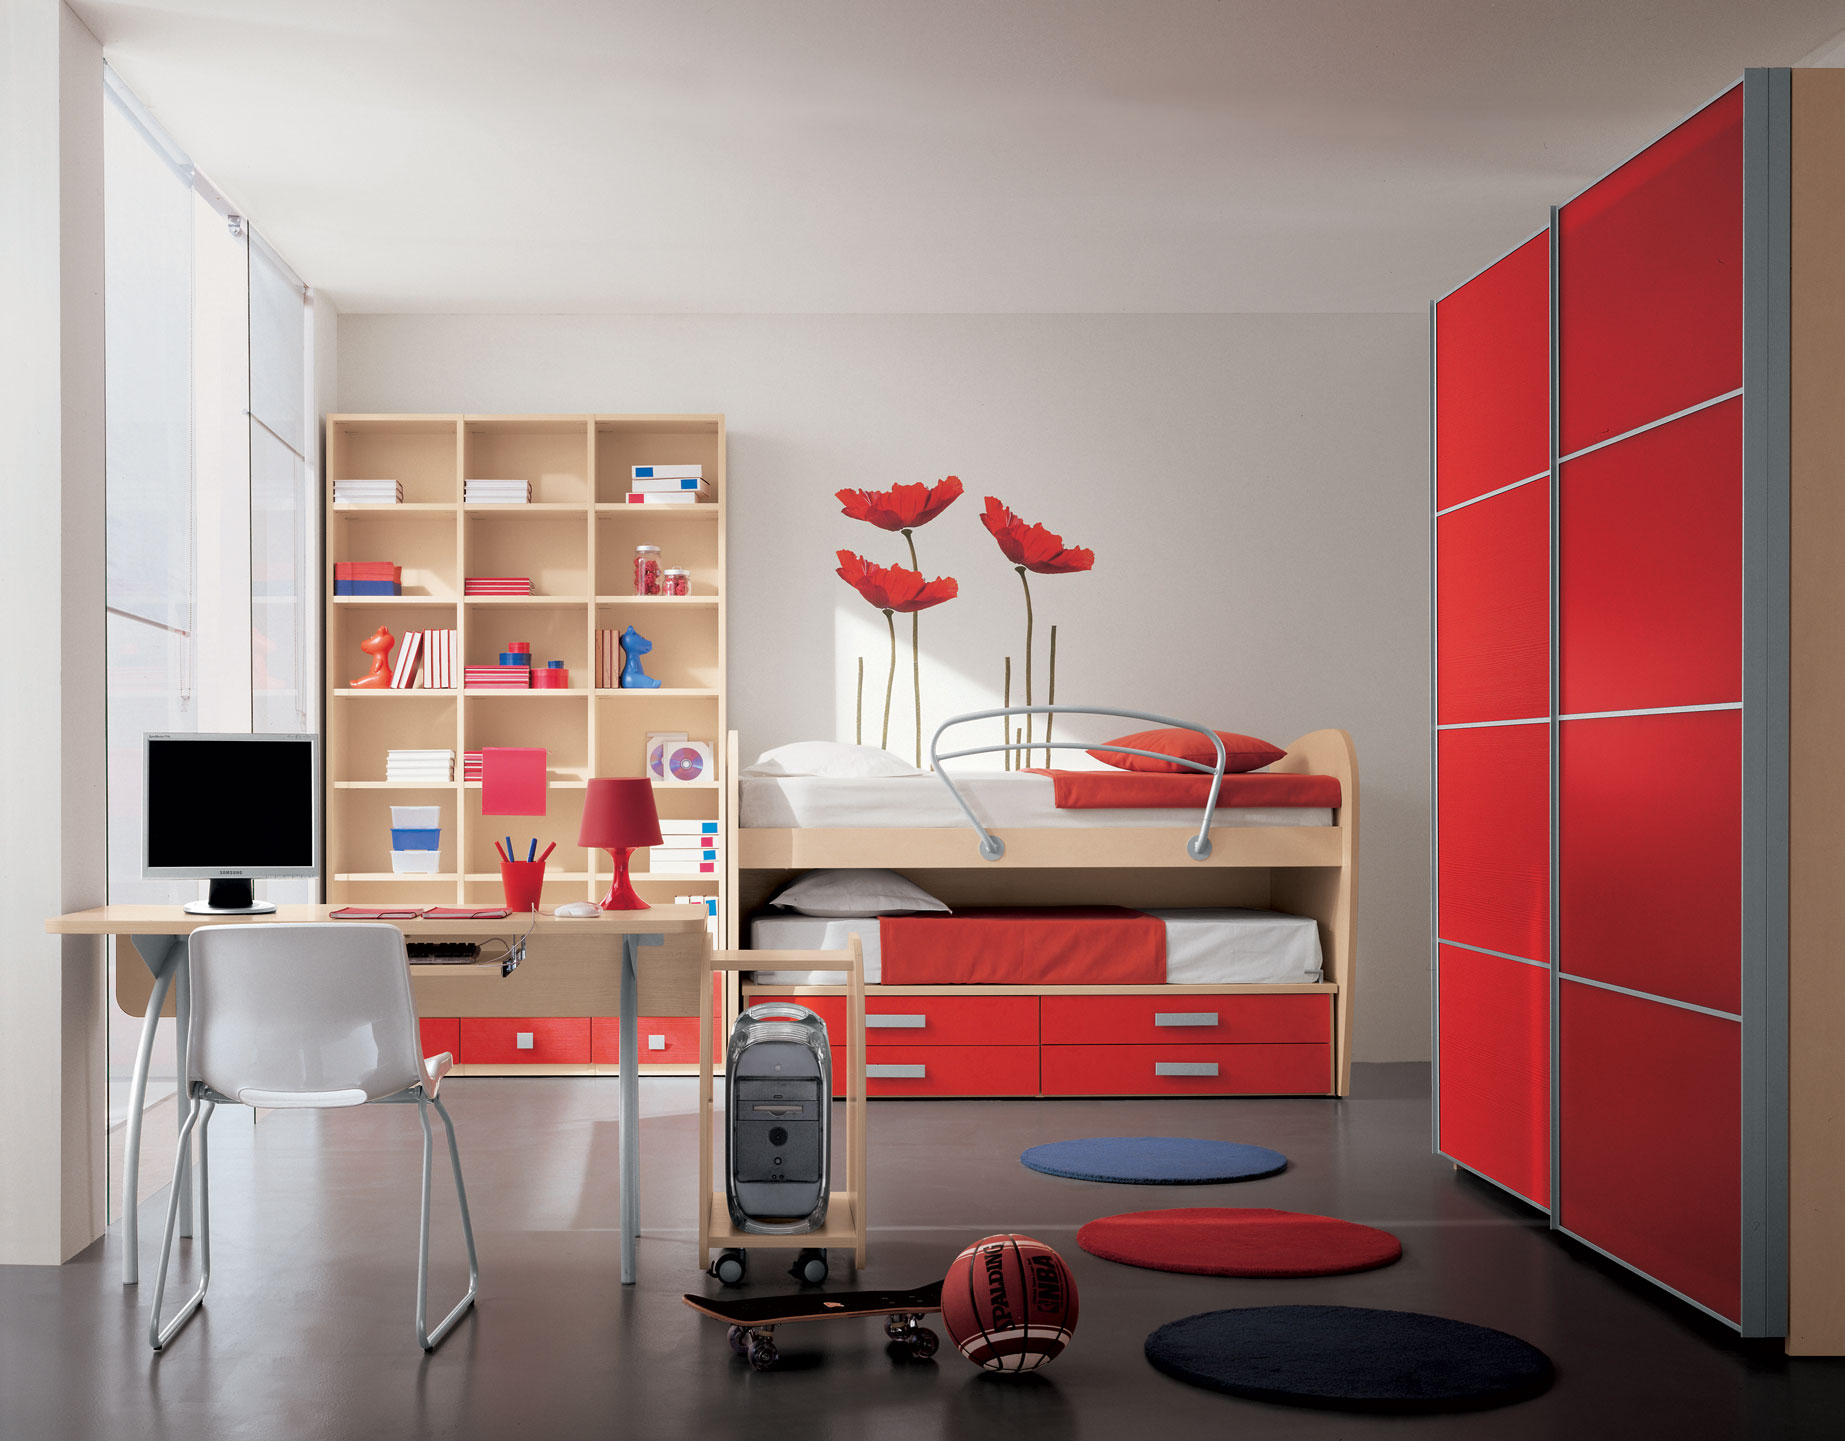 Modern Bedroom Room Interesting Modern Bedroom Of Kid Room Ideas Applying White And Red Room Color With Desk Sets And Chair Completed With Bunk Beds On Platform Drawers And Furnished With Cupboards Kids Room 15 Trendy Kids Room Ideas For The Bold Modern Home